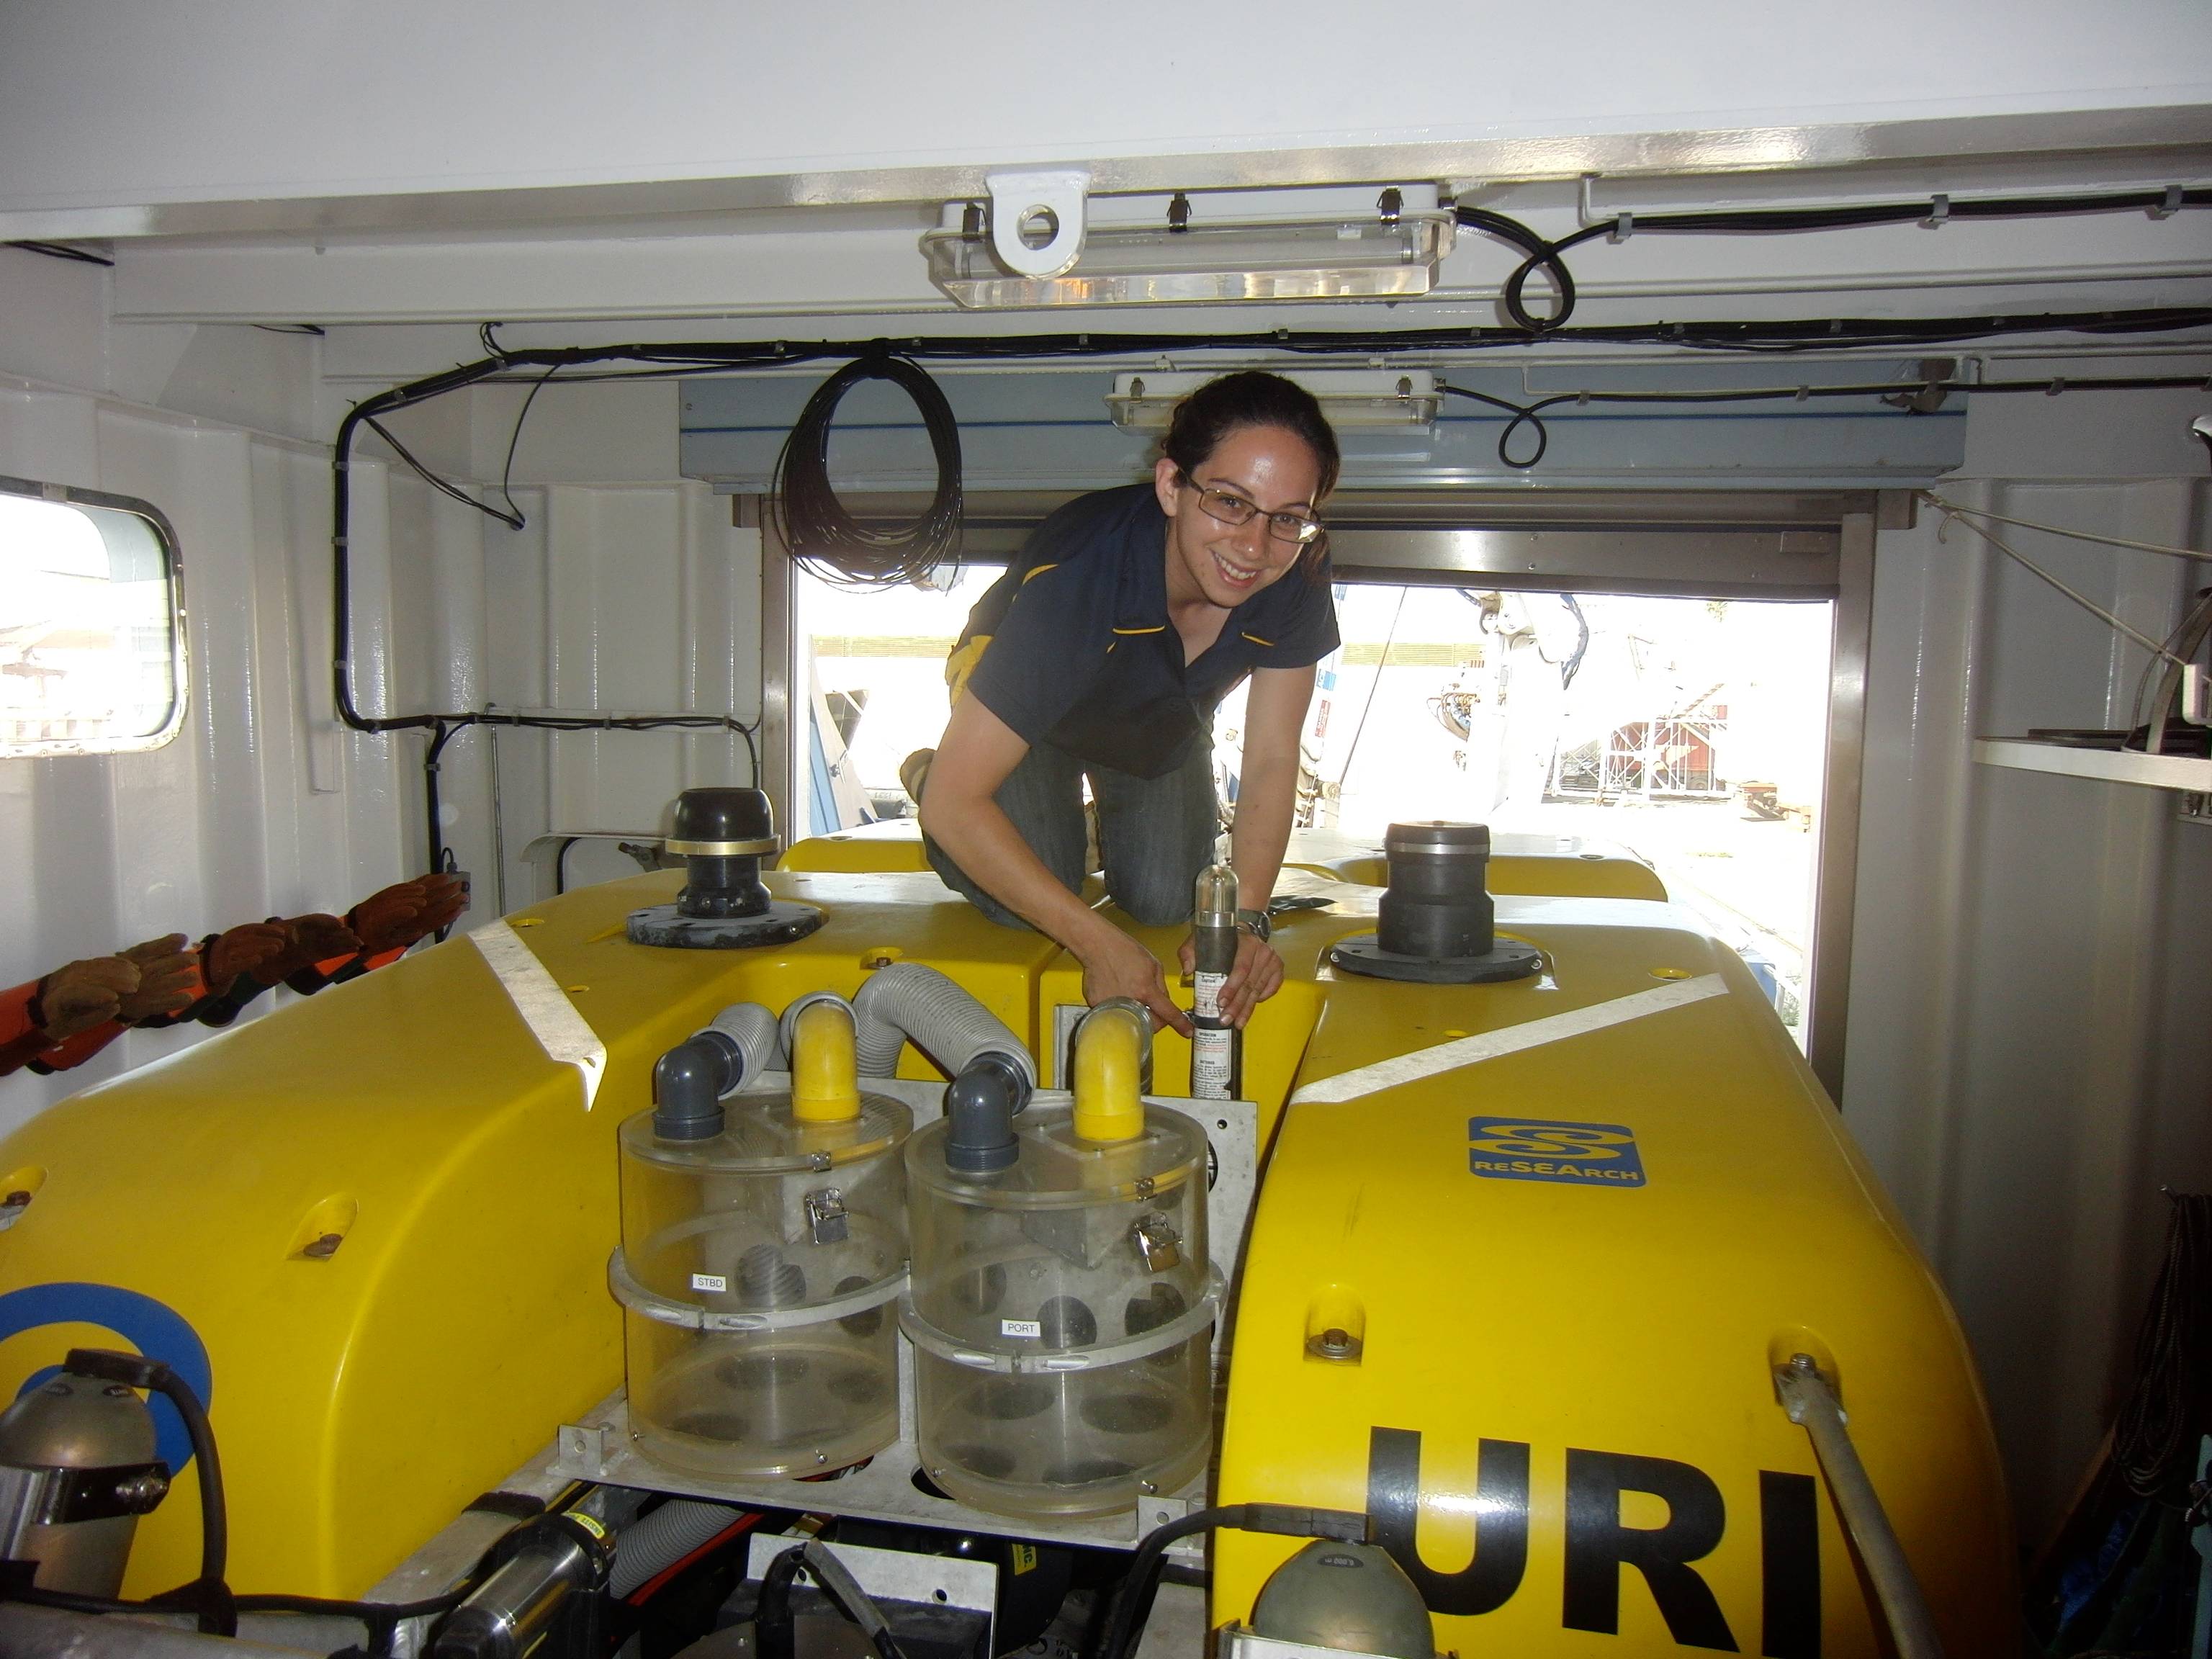 Rachel Gaines working on an ROV during her MATE Internship on the E/V Nautilus